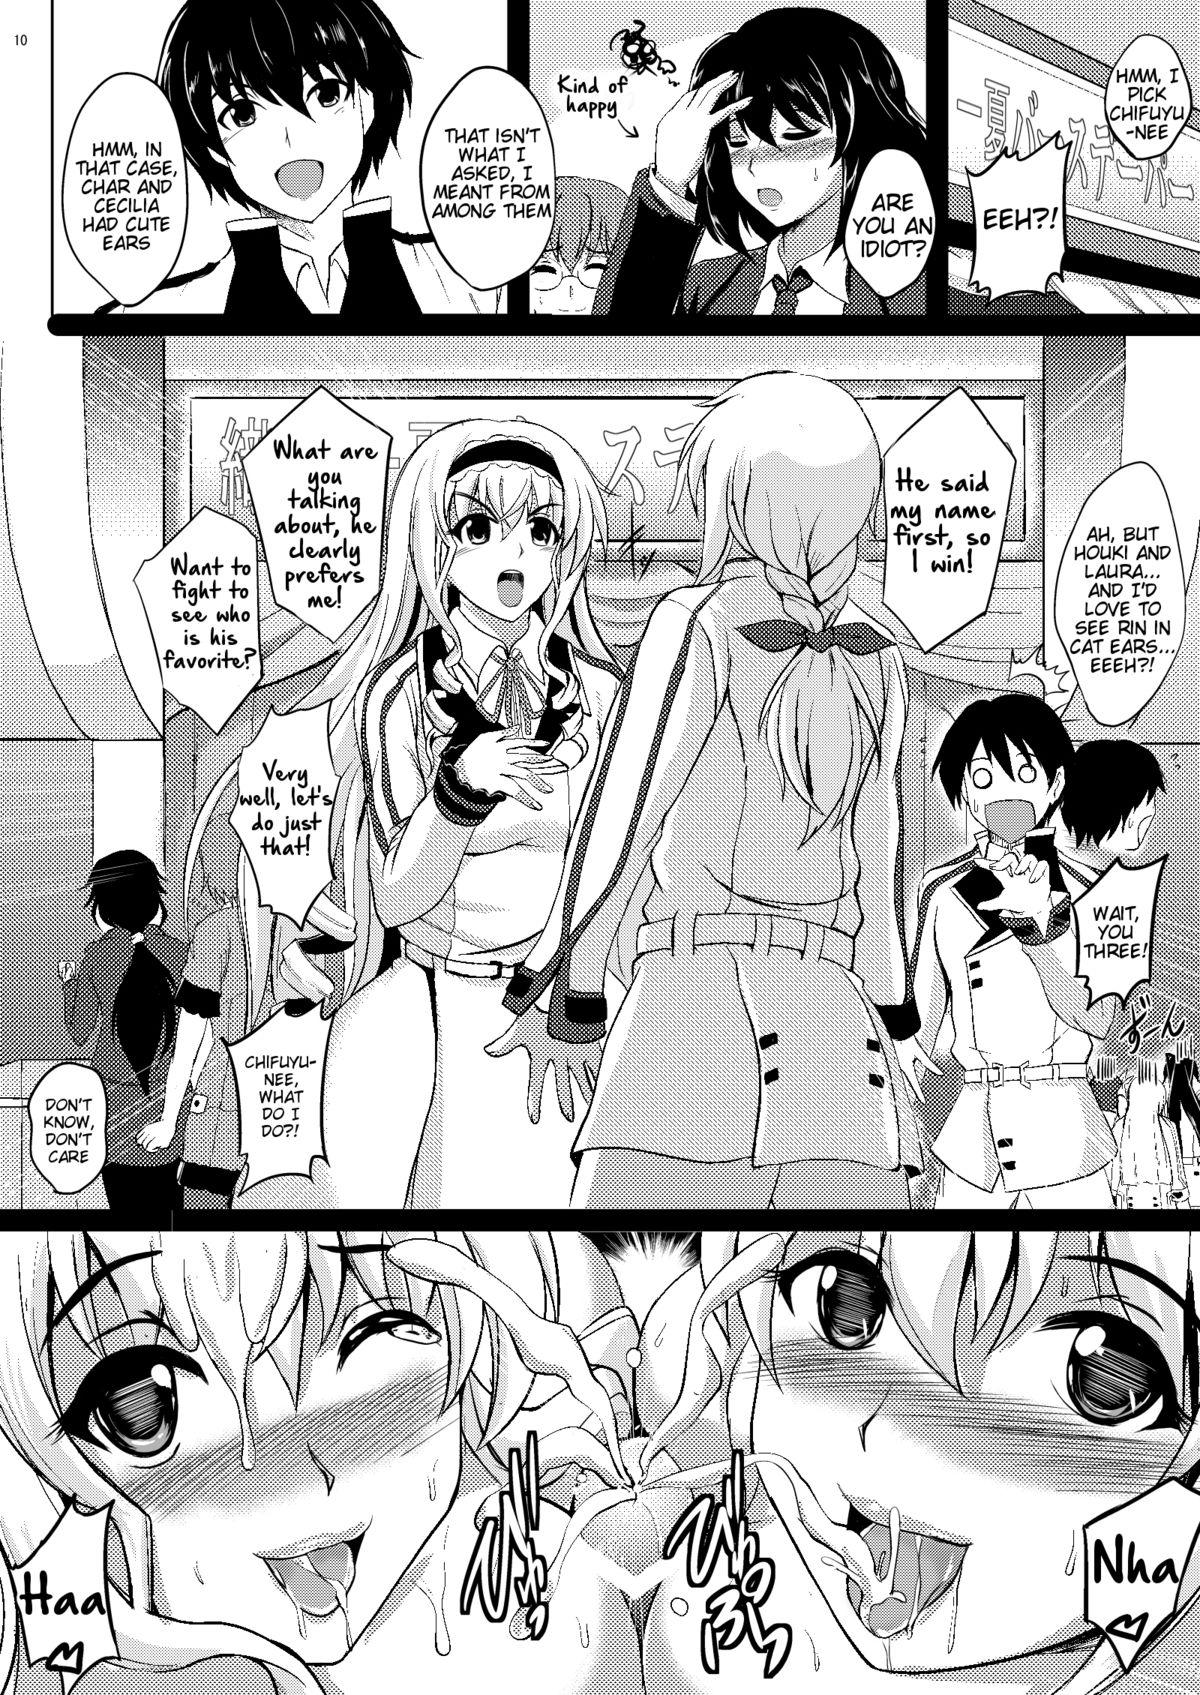 Hot Milf Poodle & Bunny Time - Infinite stratos Deep Throat - Page 10